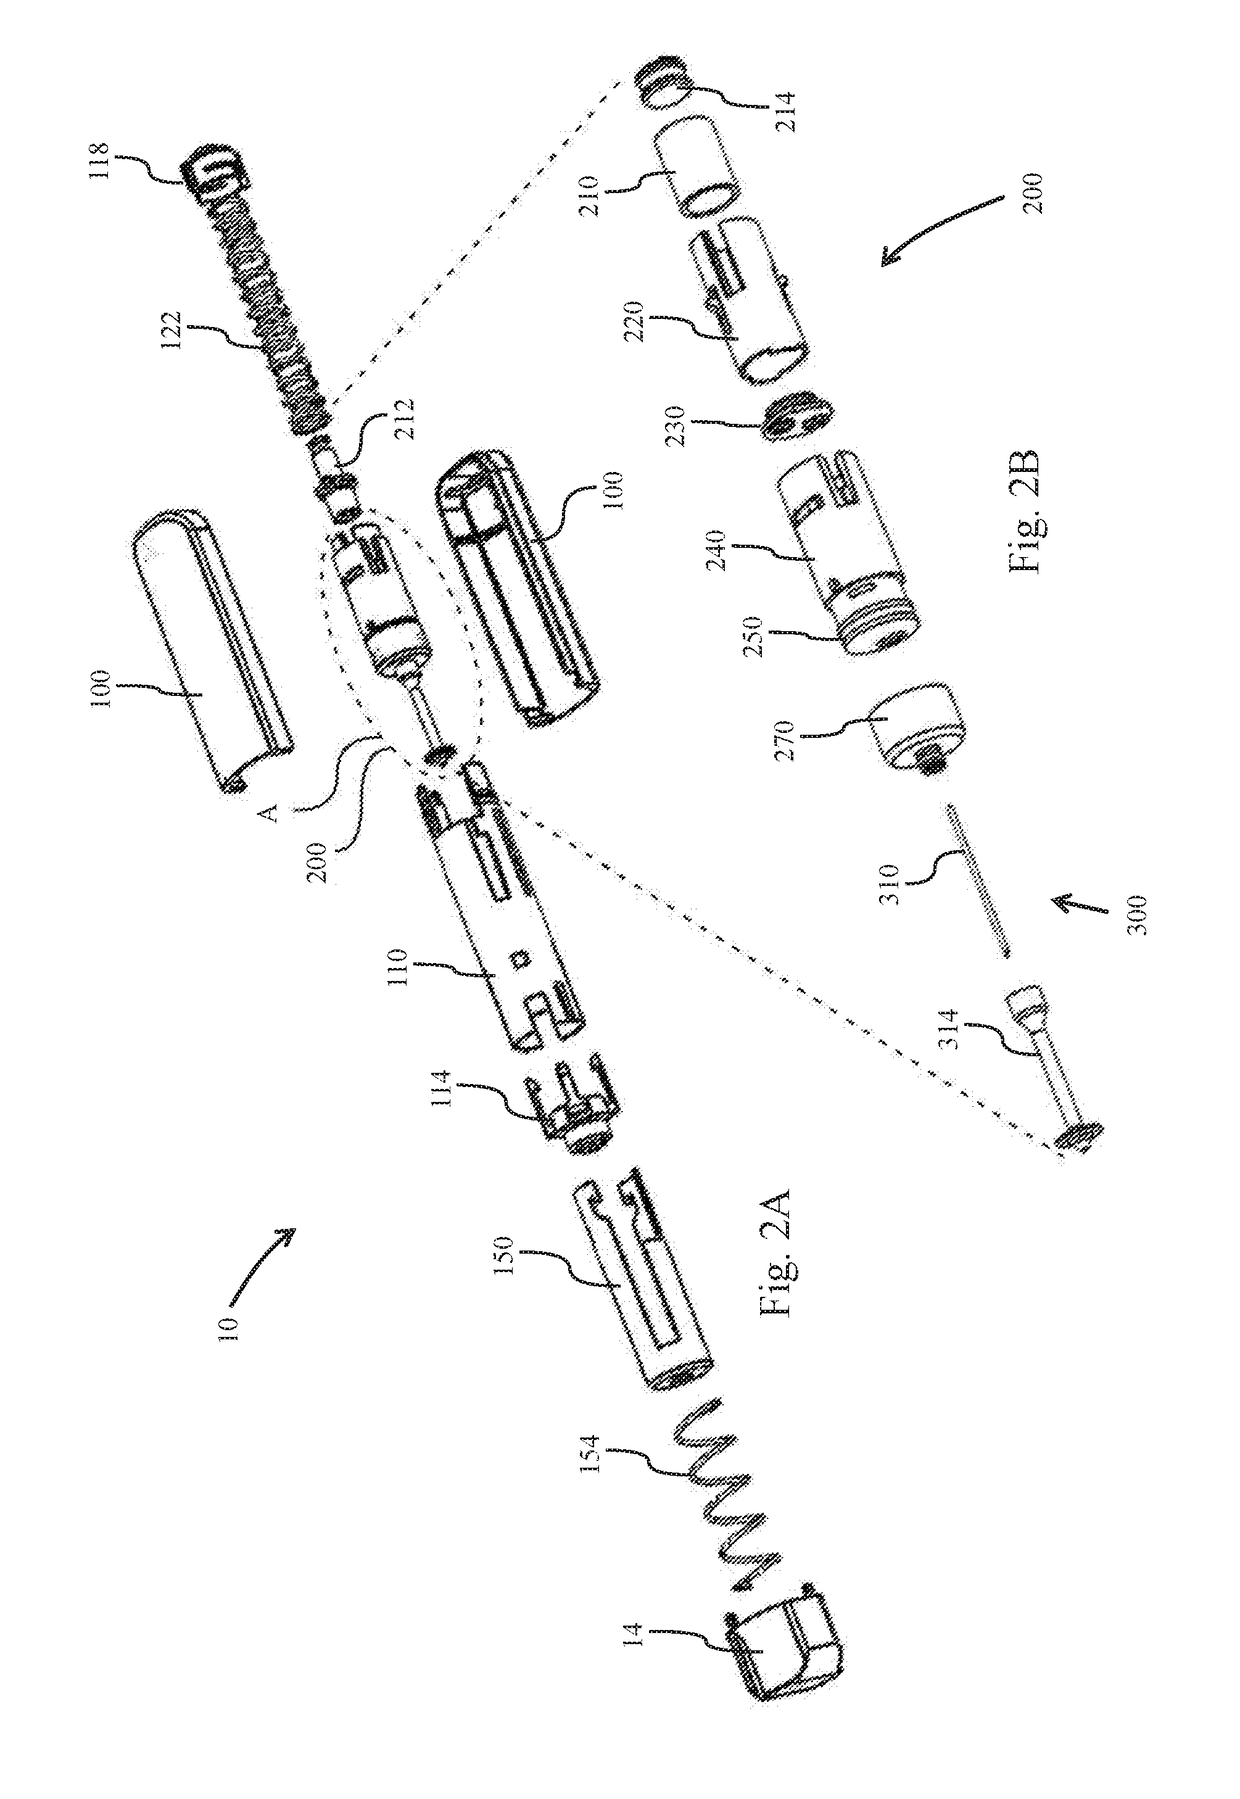 Mixing and Injection device with sterility features